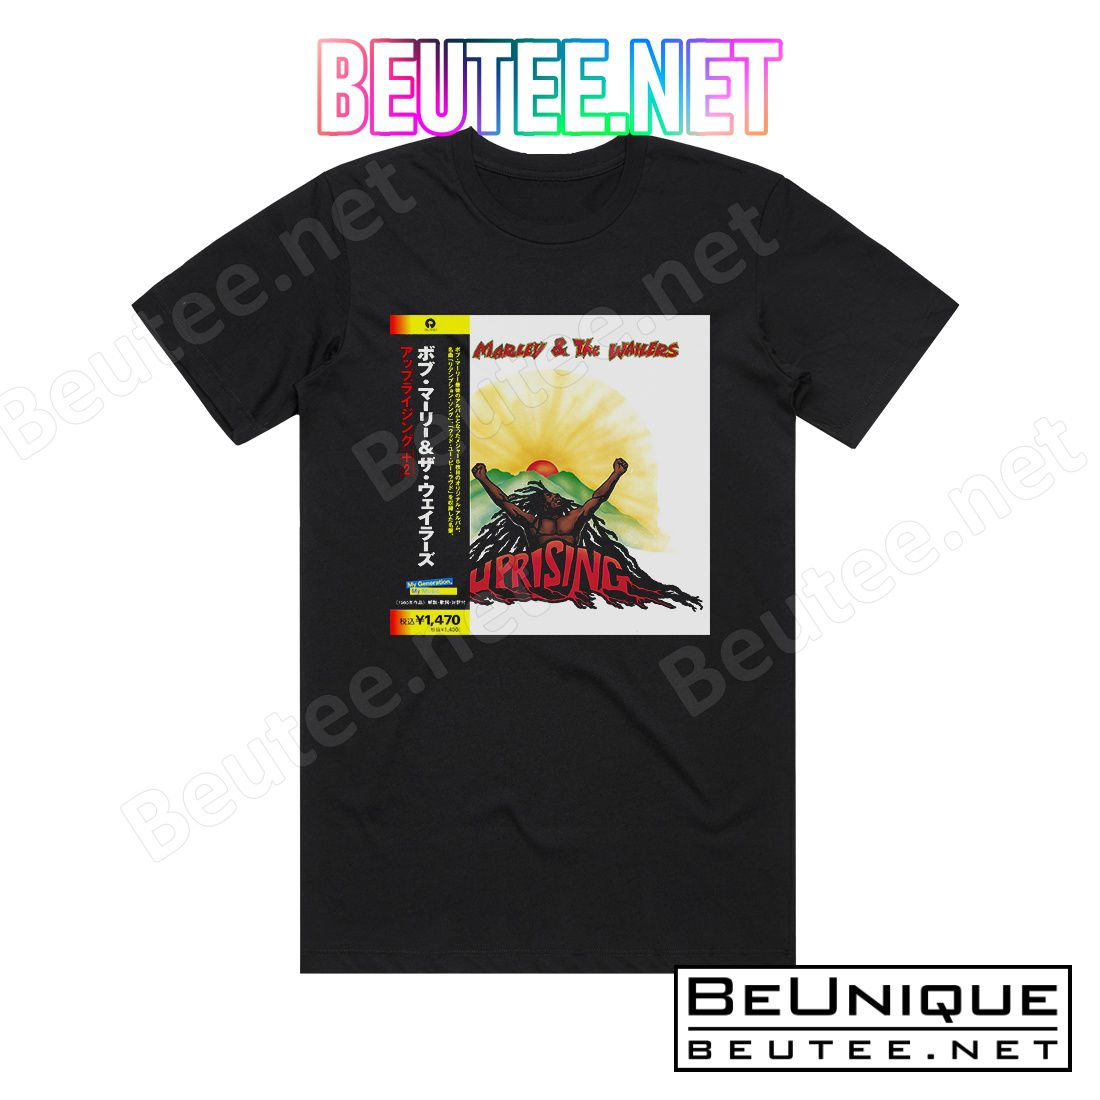 Bob Marley and The Wailers Uprising 2 Album Cover T-Shirt